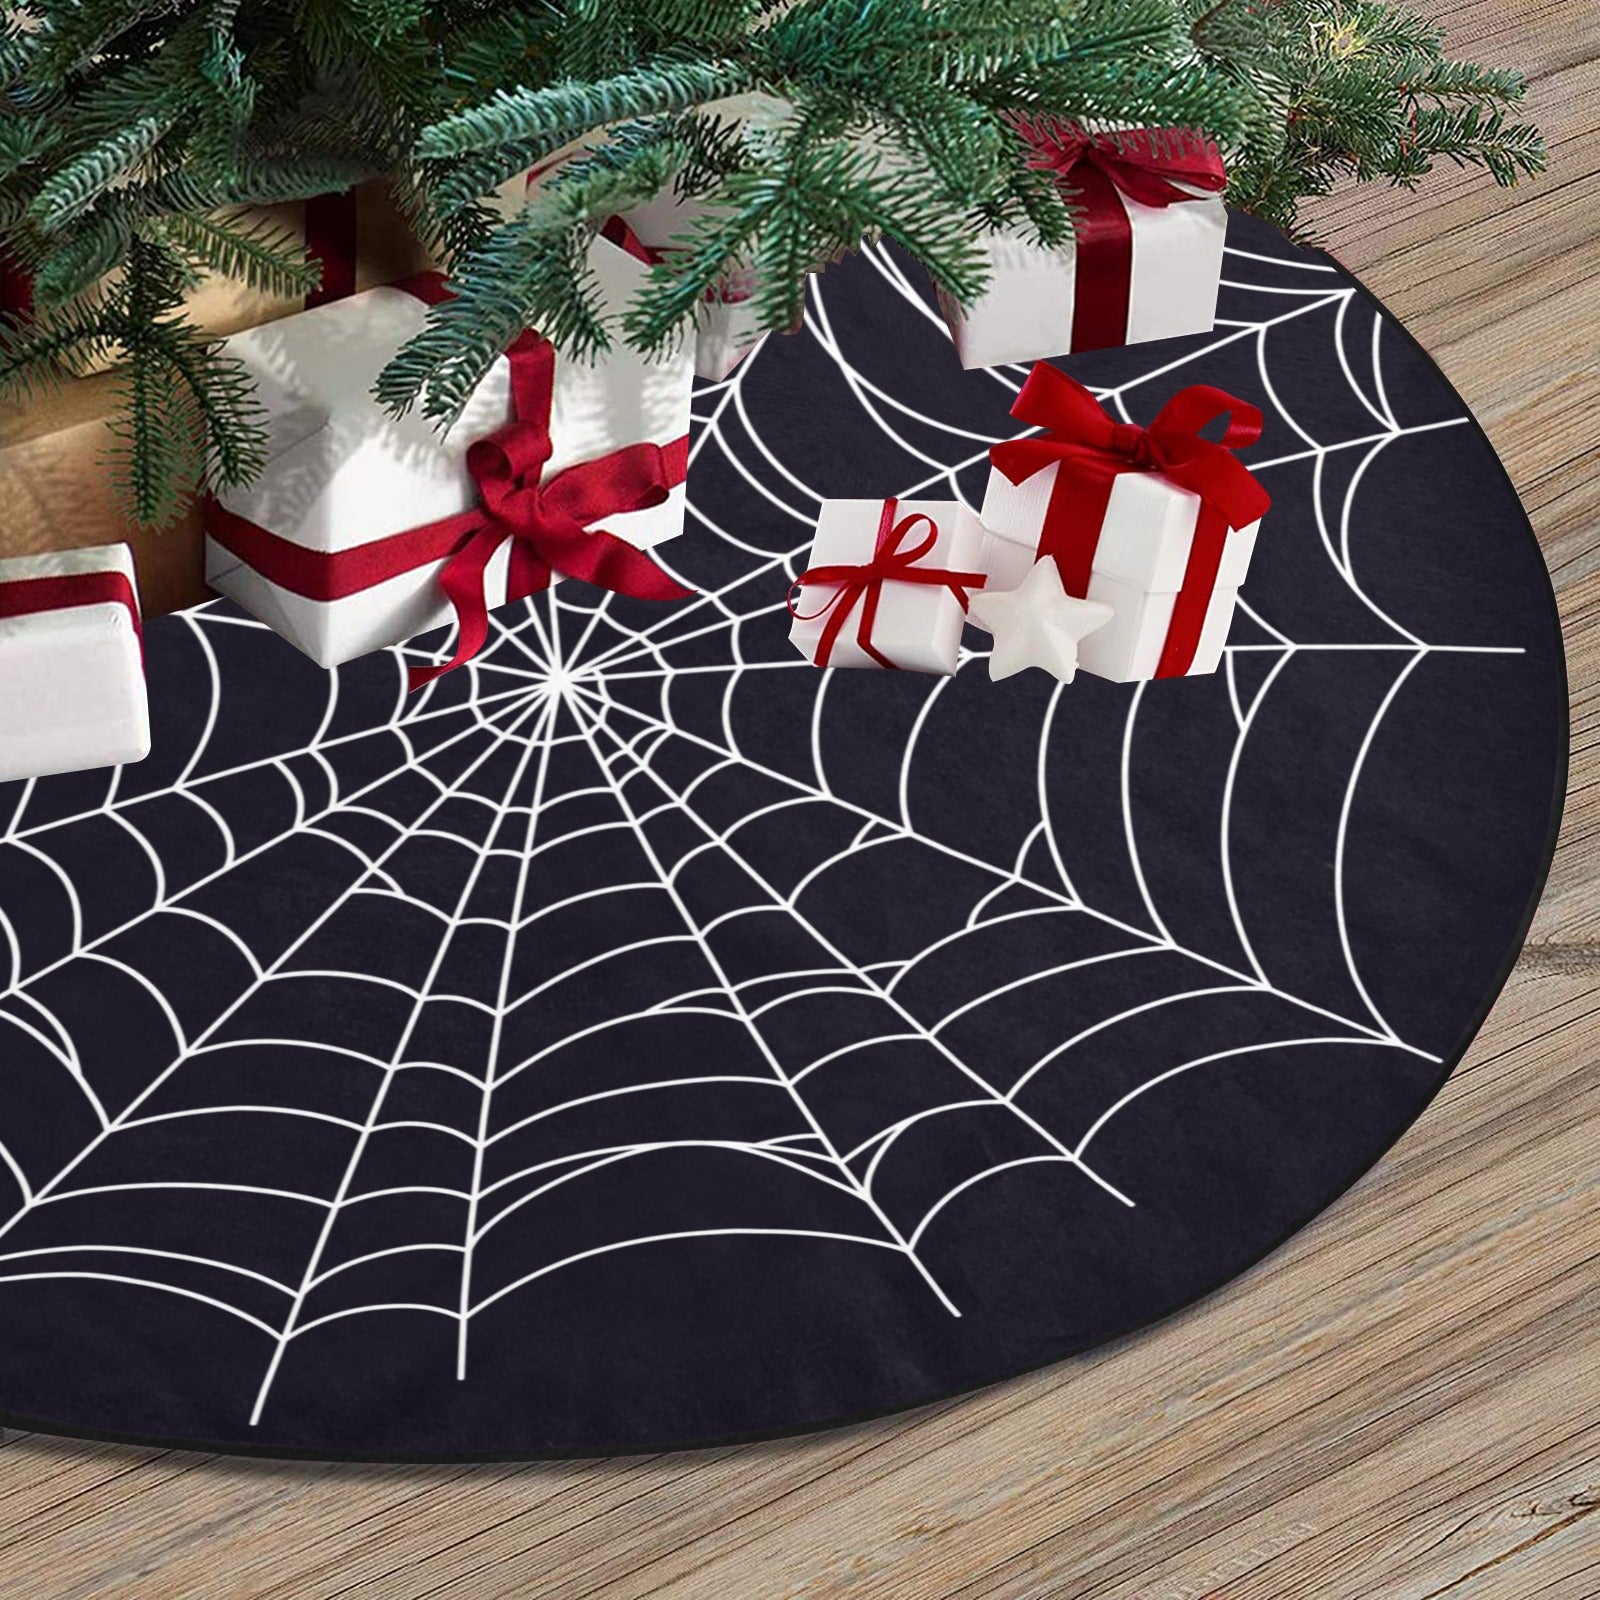 Spiderweb Halloween Tree Skirt, Black Goth Vampire Christmas Spooky Cover Decor Decoration All Hallows Eve Creepy 30 36 47 Small Large Party Starcove Fashion